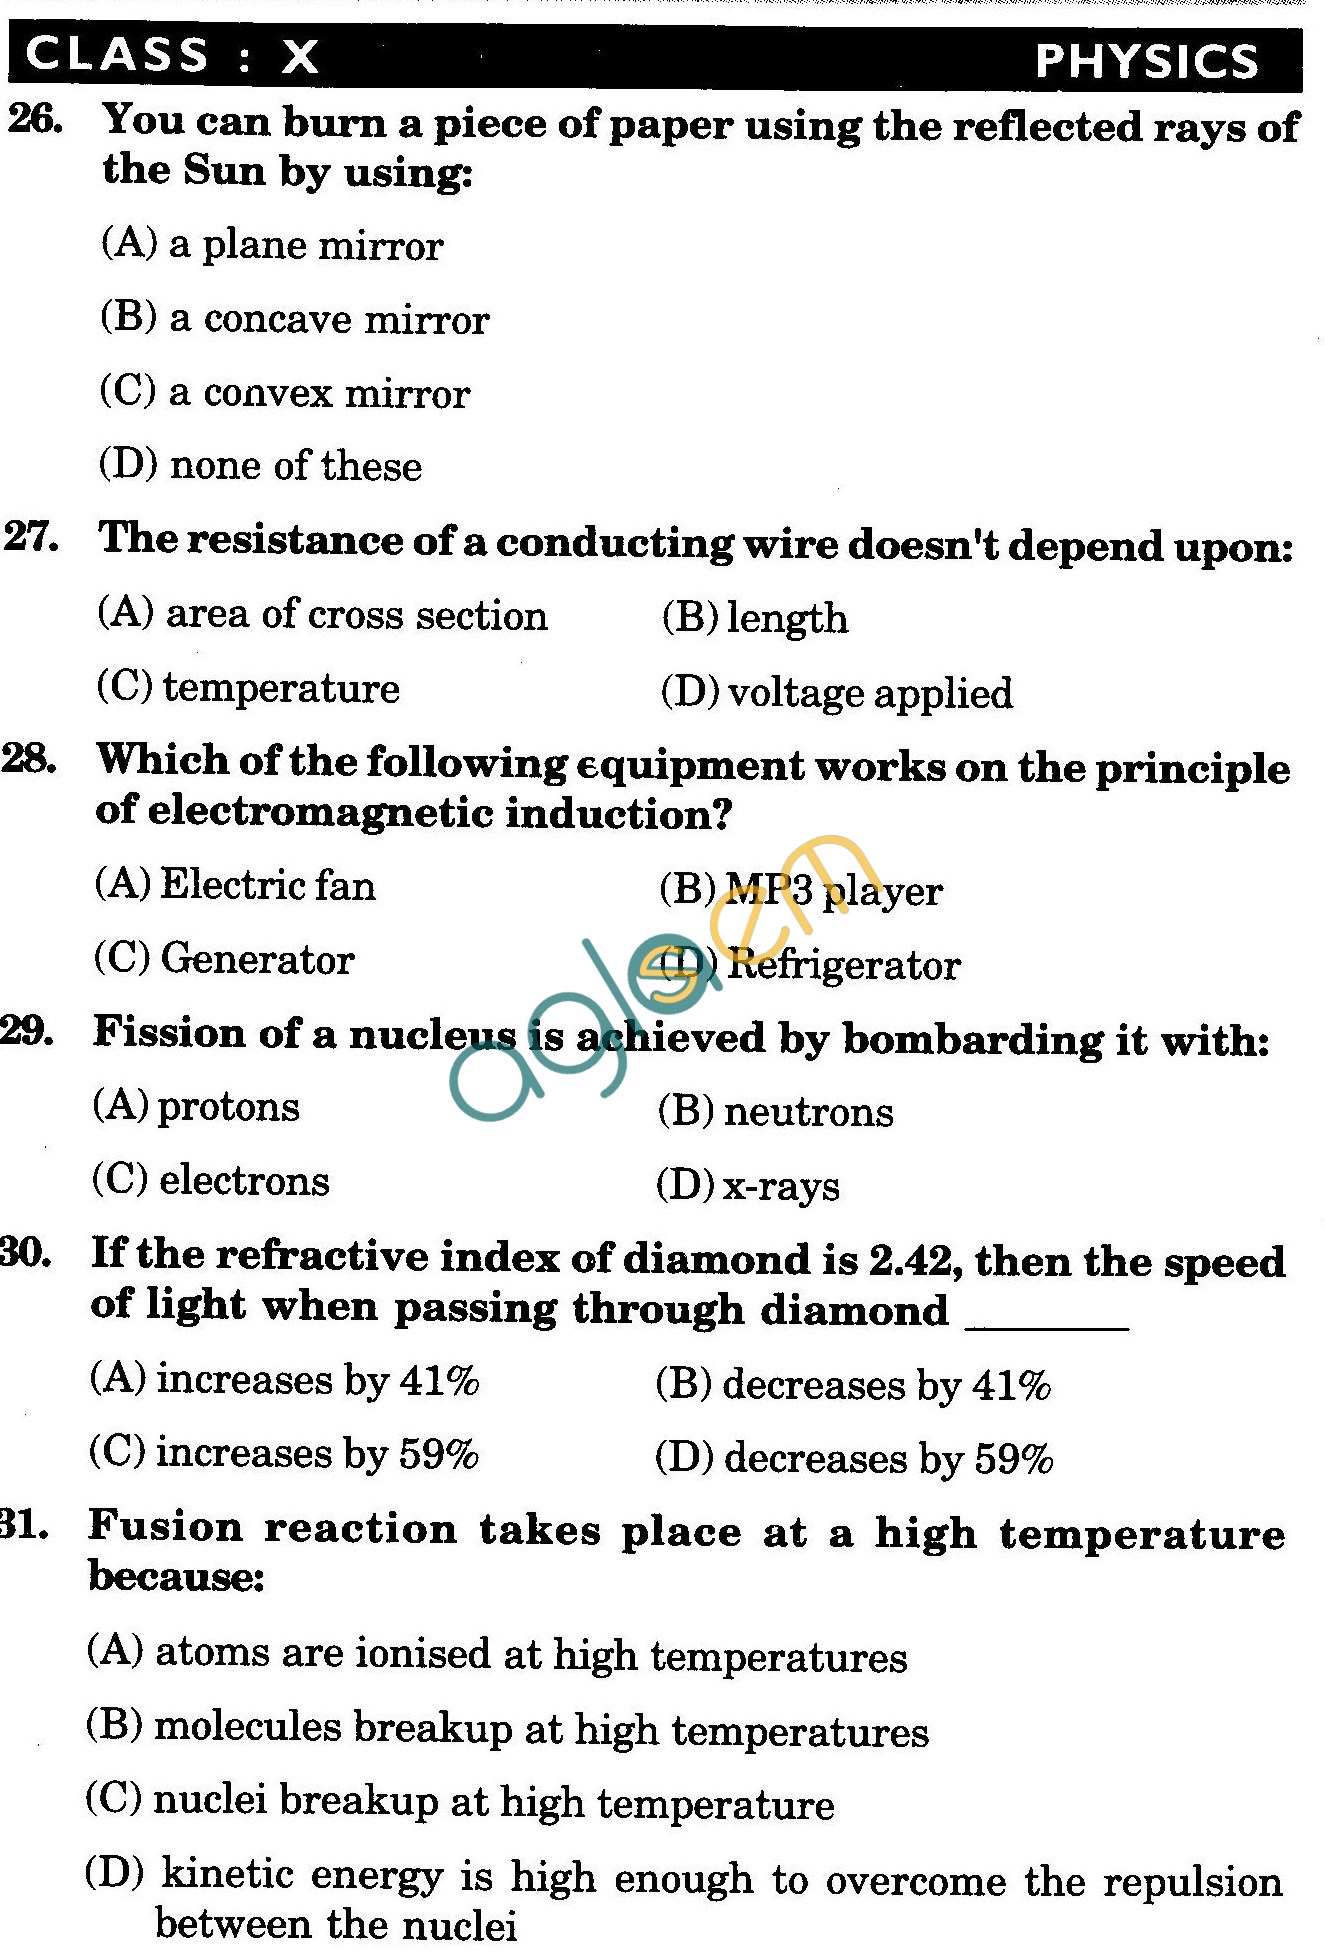 NSTSE 2009 Class X Question Paper with Answers - Physics